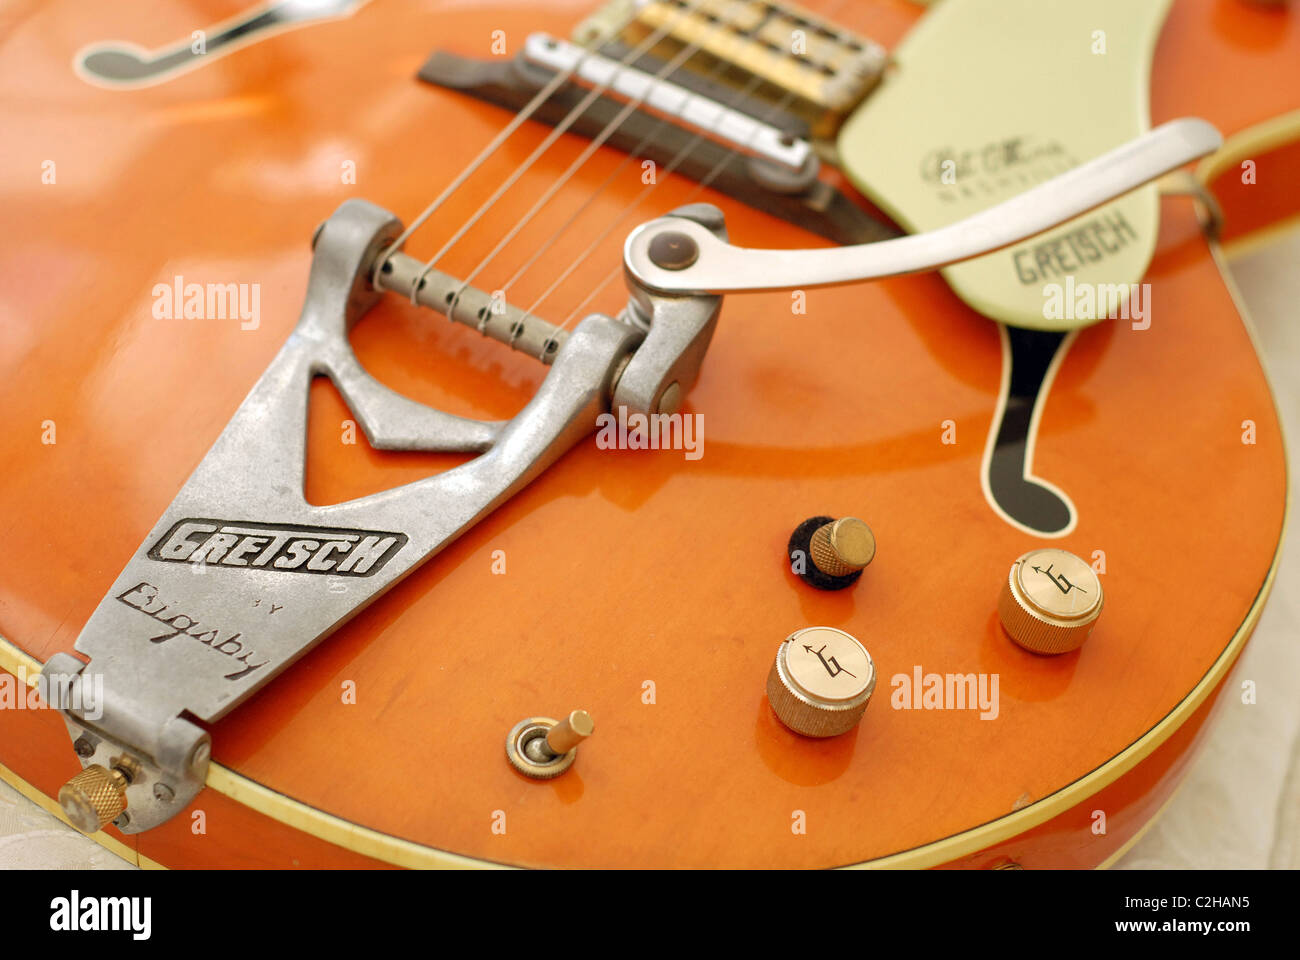 Vintage 1968 Gretsch Chet Atkins Nashville 6120 electric guitar with Bigsby vibrato. Stock Photo